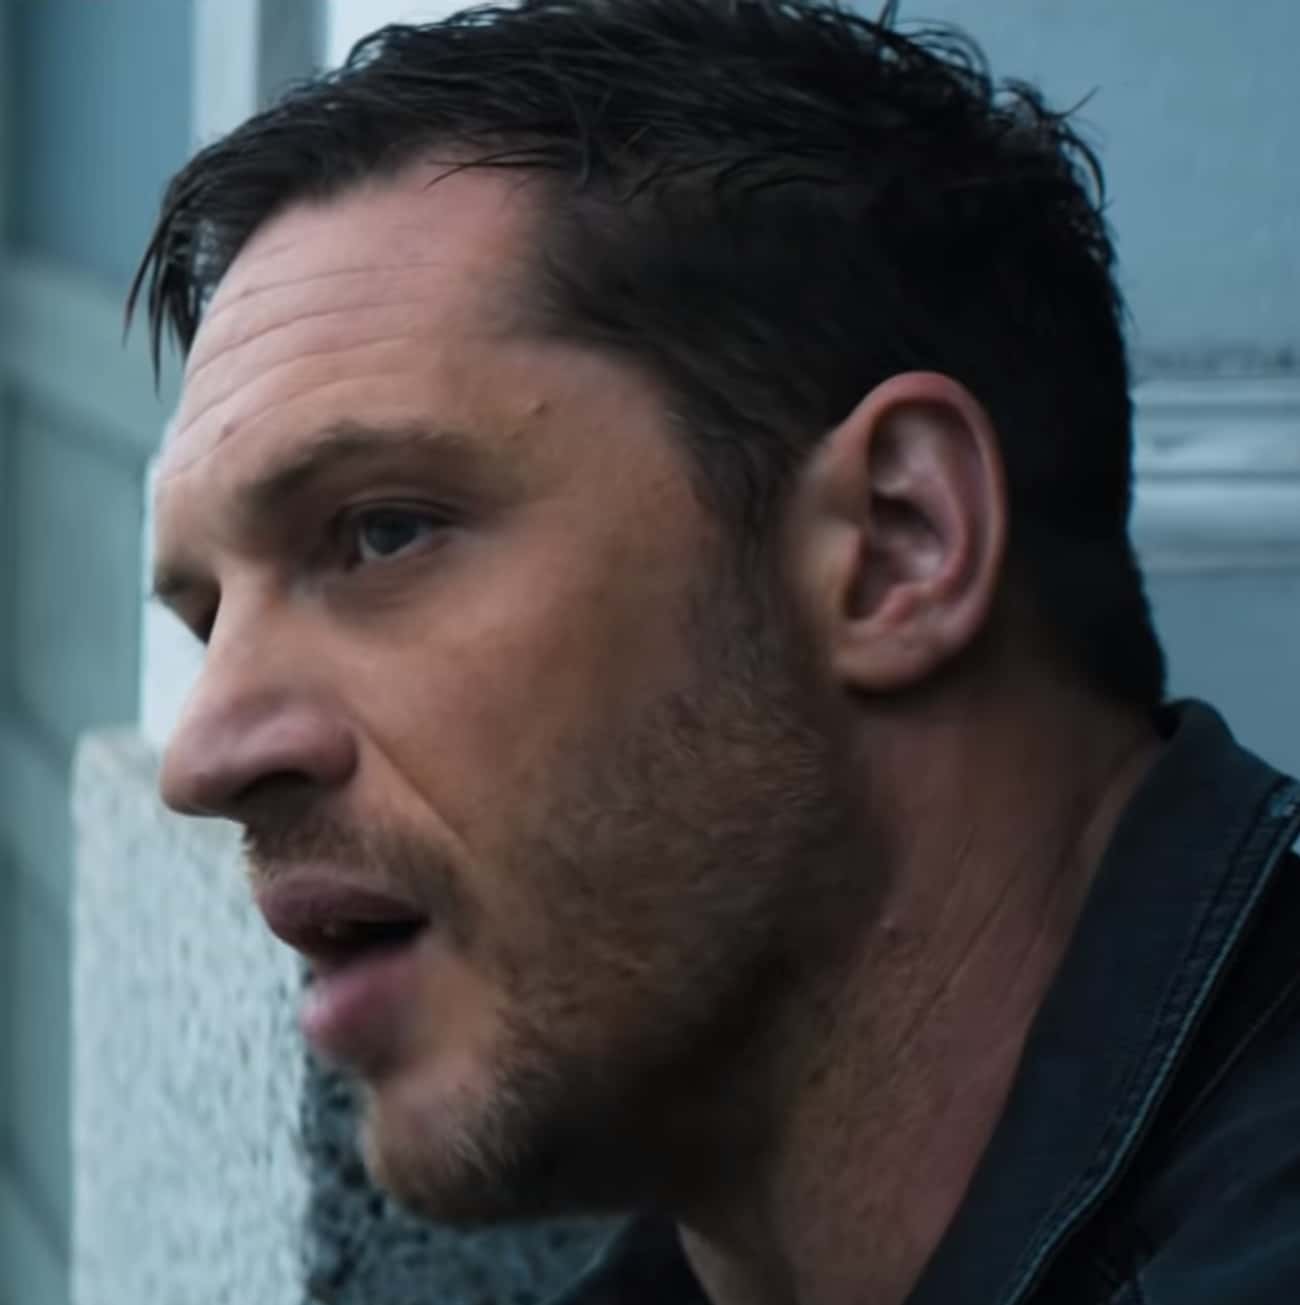 The Best Quotes From 'Venom'